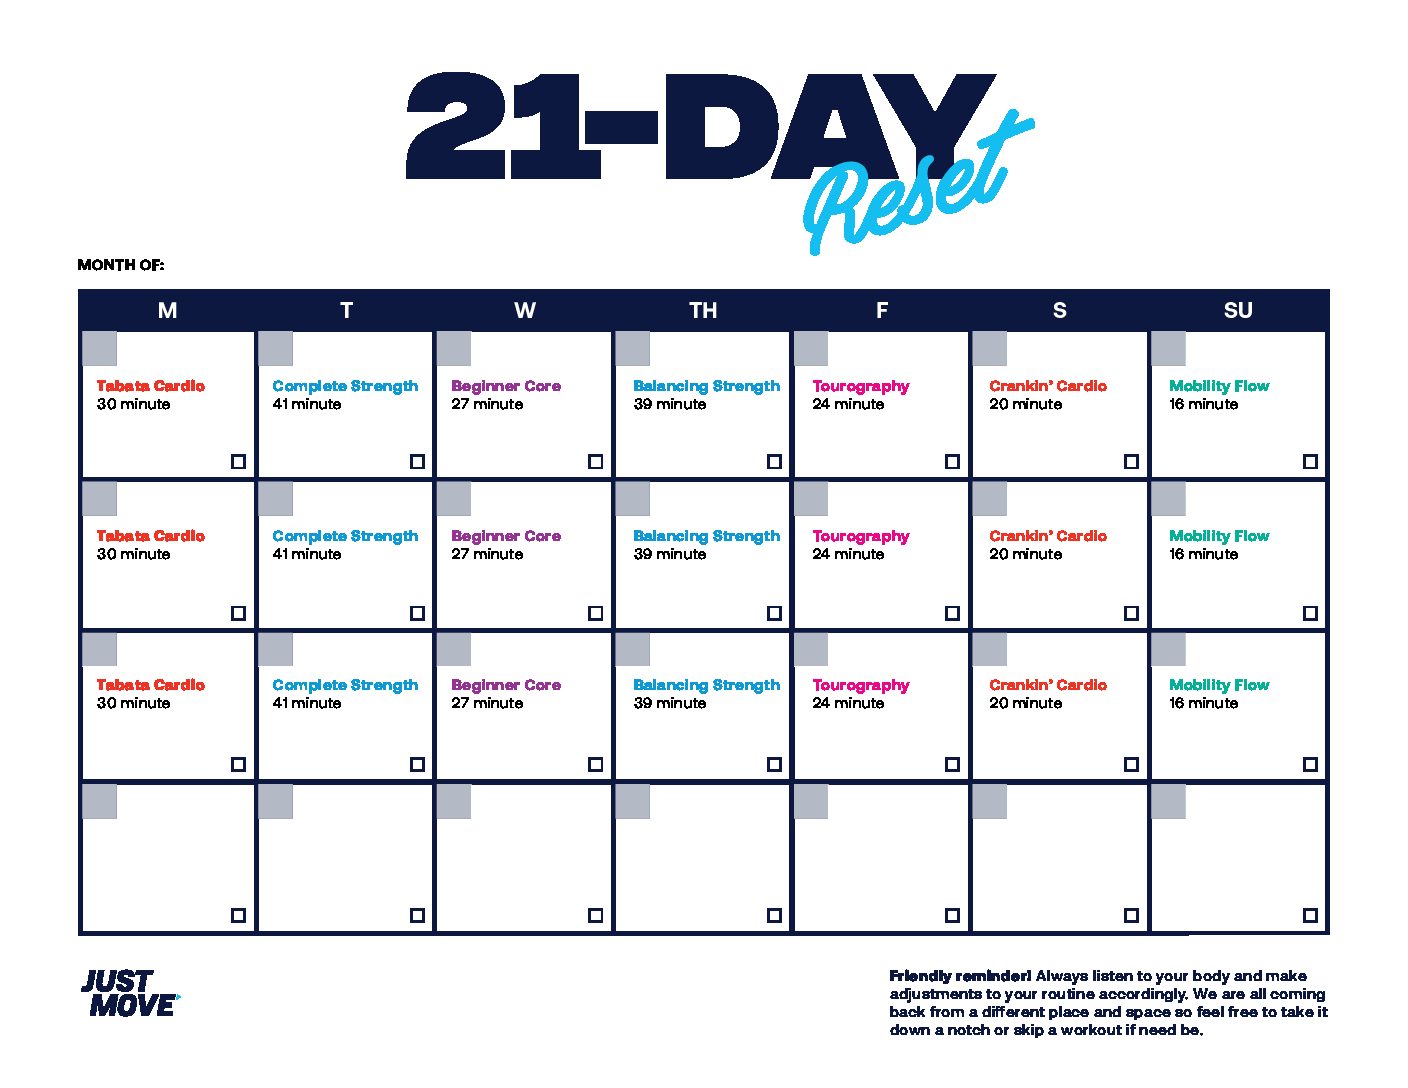 21Day Reset JUST MOVE by KaisaFit